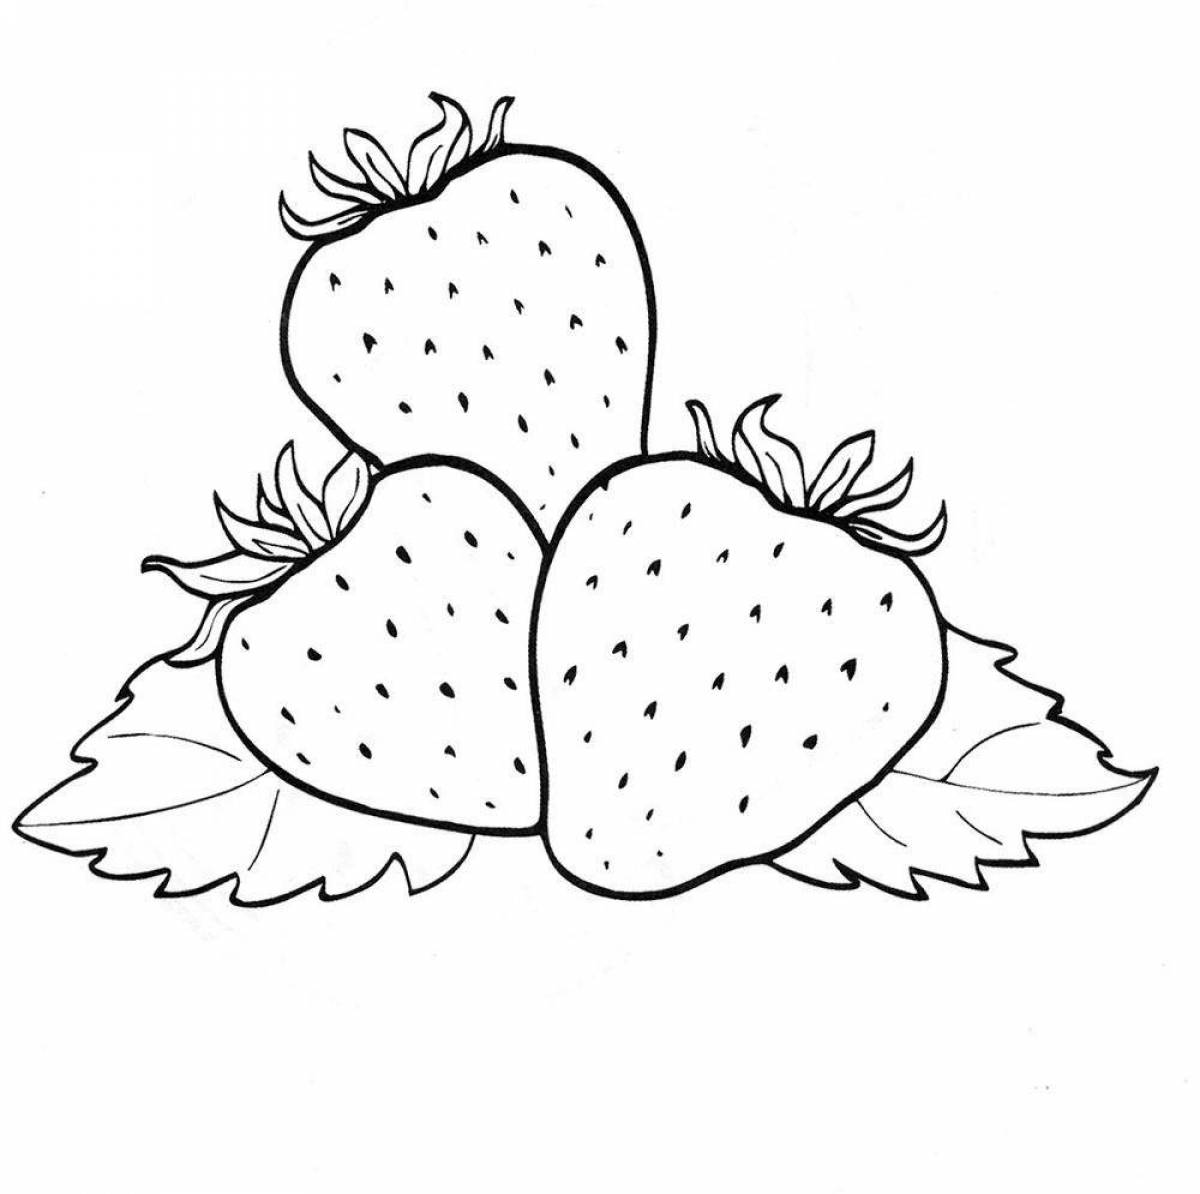 Fabulous strawberry coloring pages for 3-4 year olds